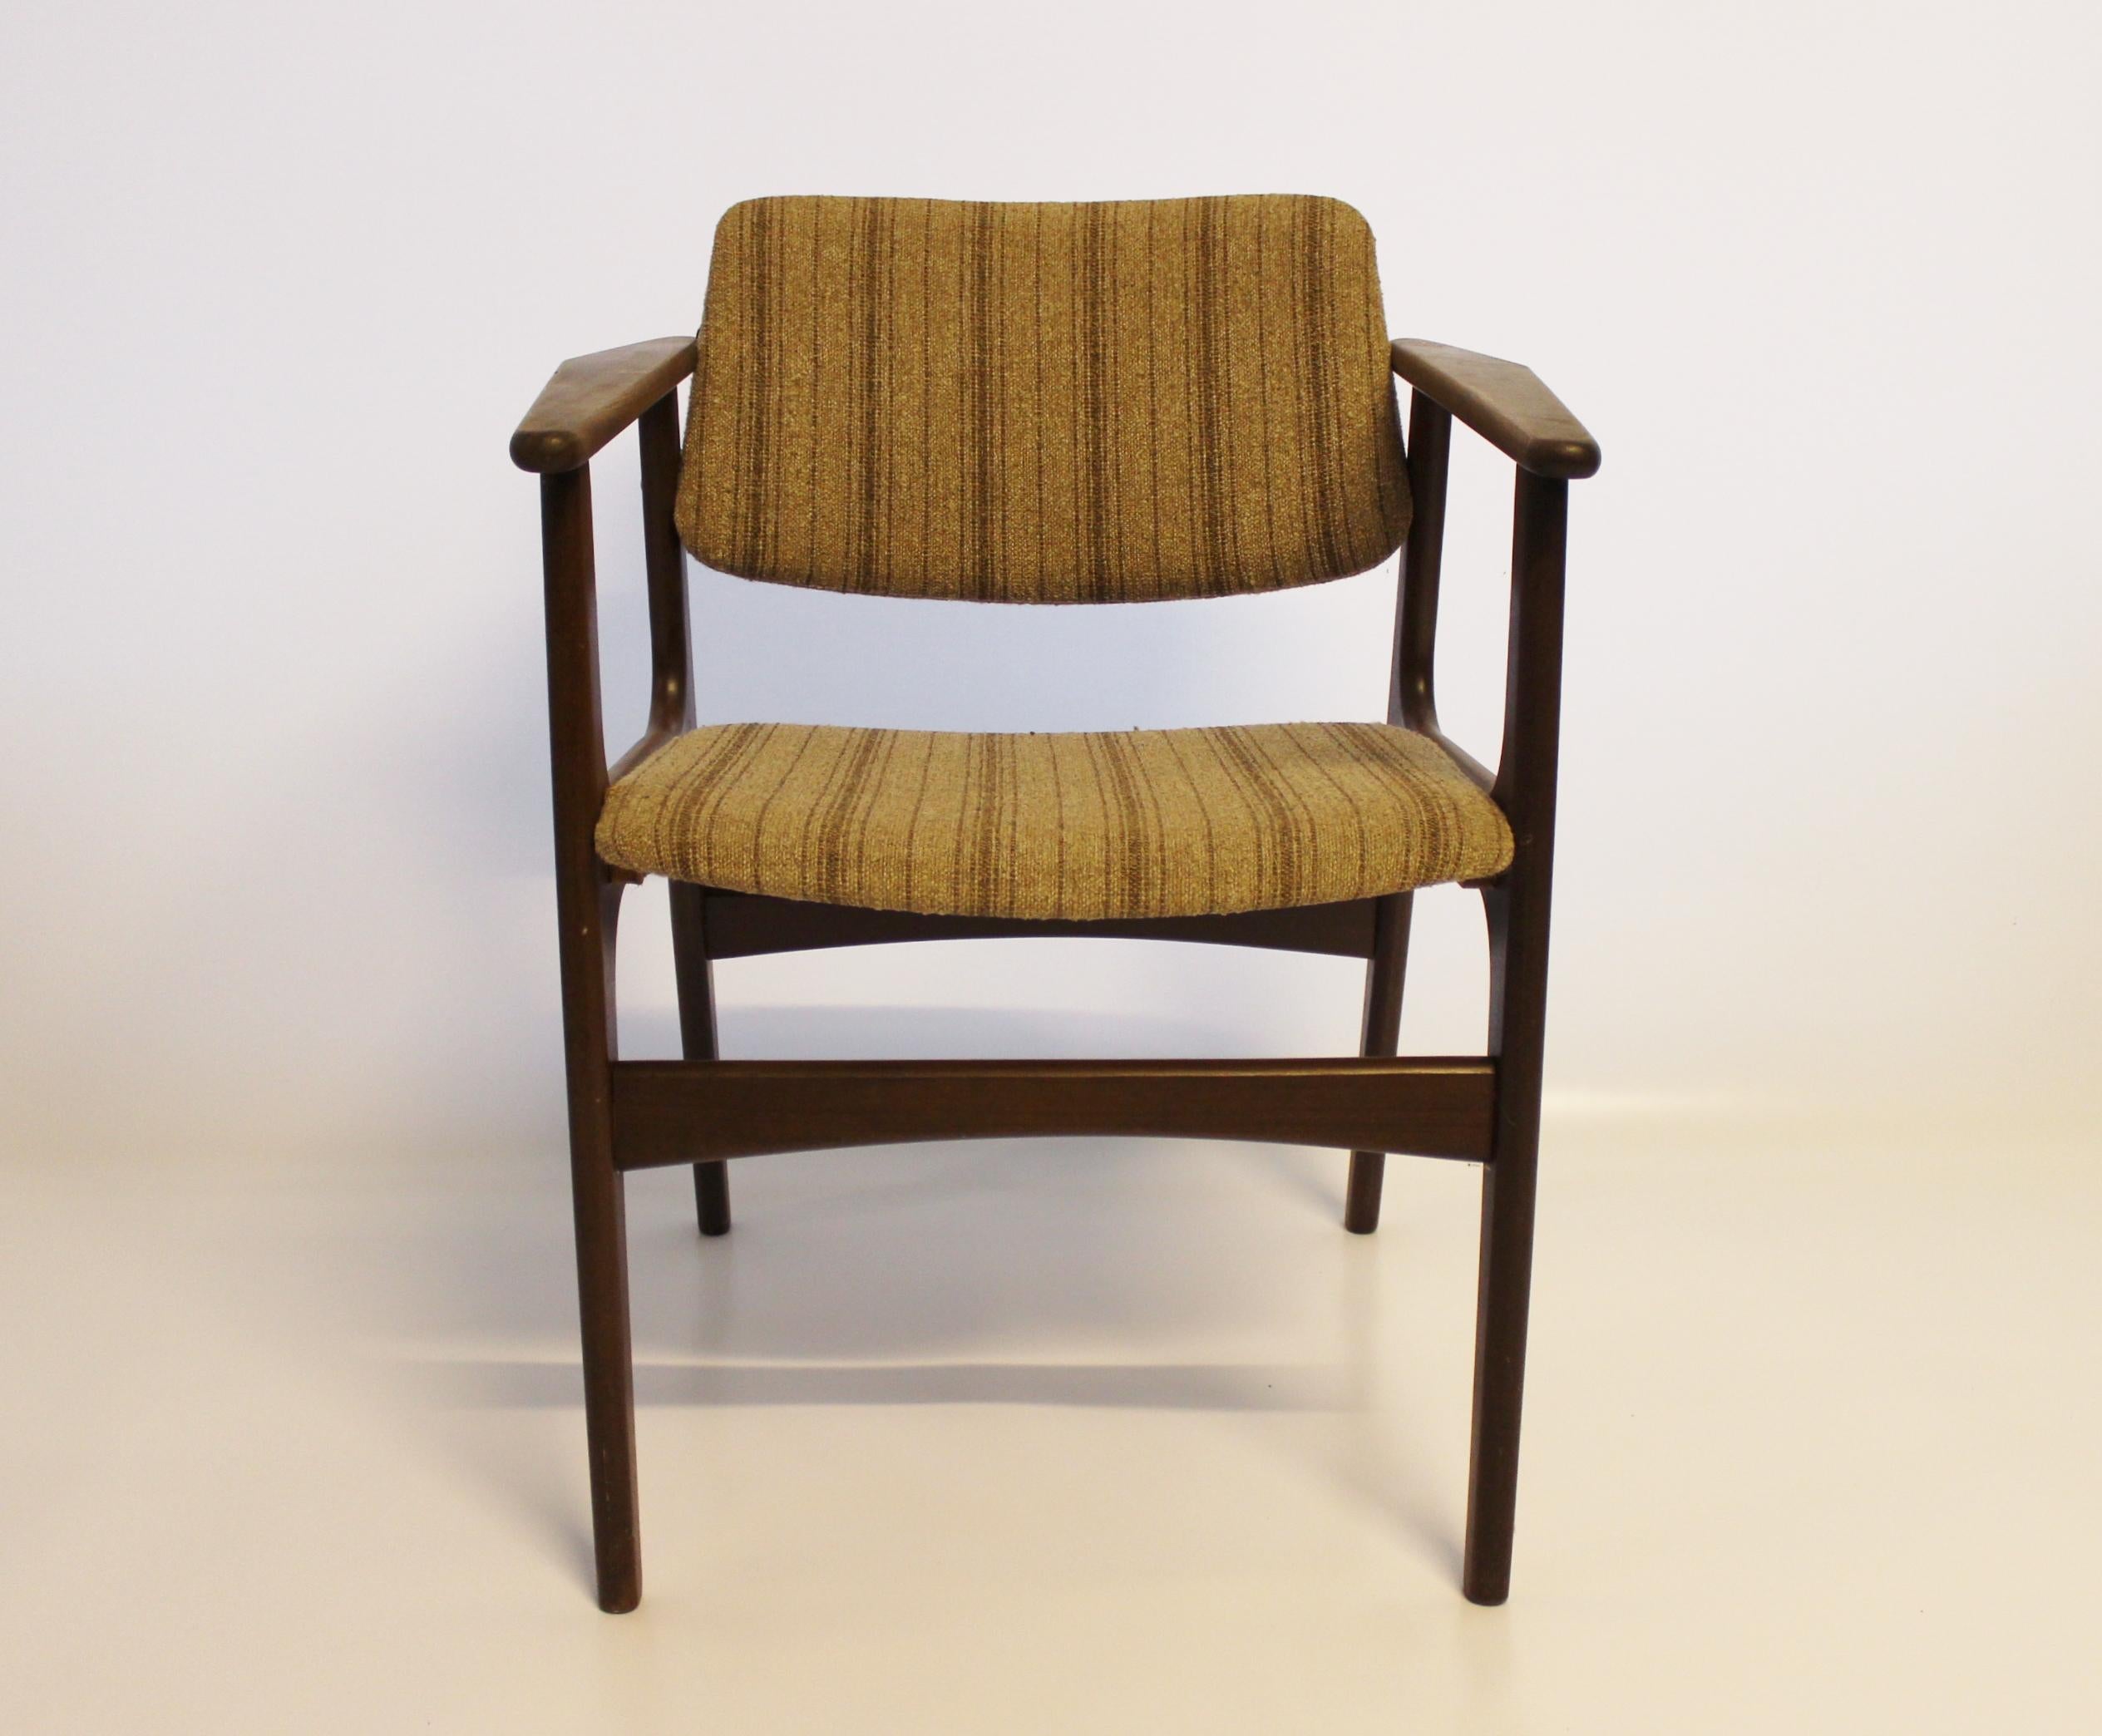 This set of four armchairs combines elegant design with exceptional craftsmanship, reflecting the renowned work of Danish designer Erik Buch. Crafted from teak wood, these chairs exude warmth and sophistication, characteristic of mid-century Danish